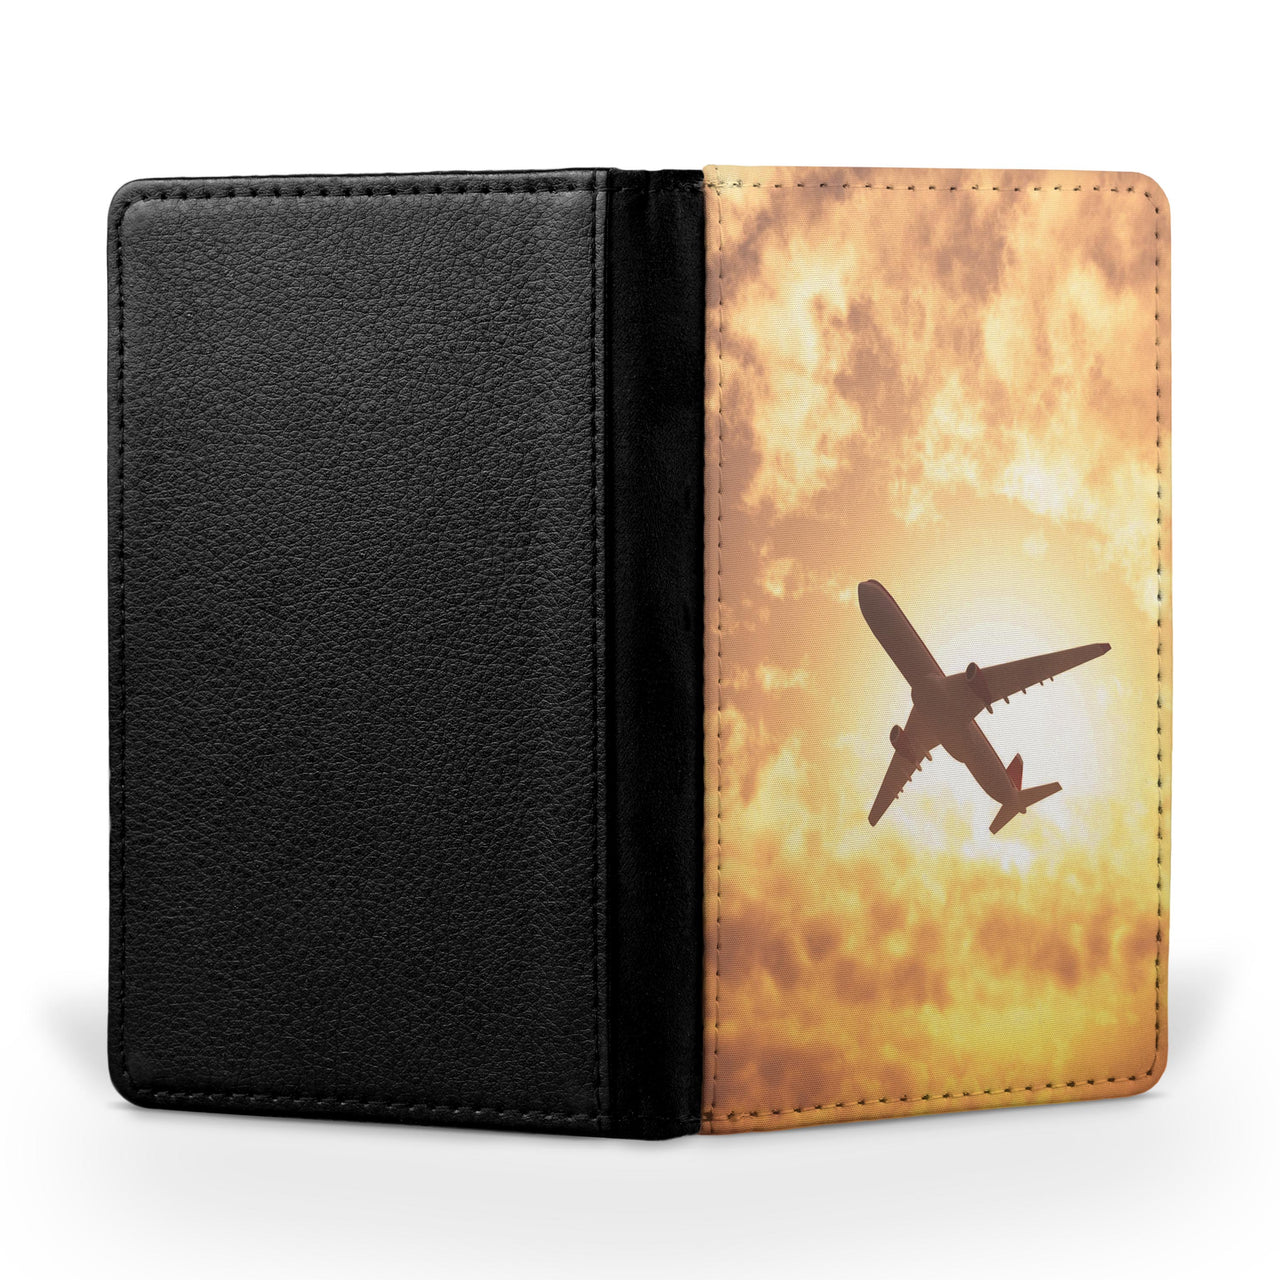 Plane Passing By Printed Passport & Travel Cases